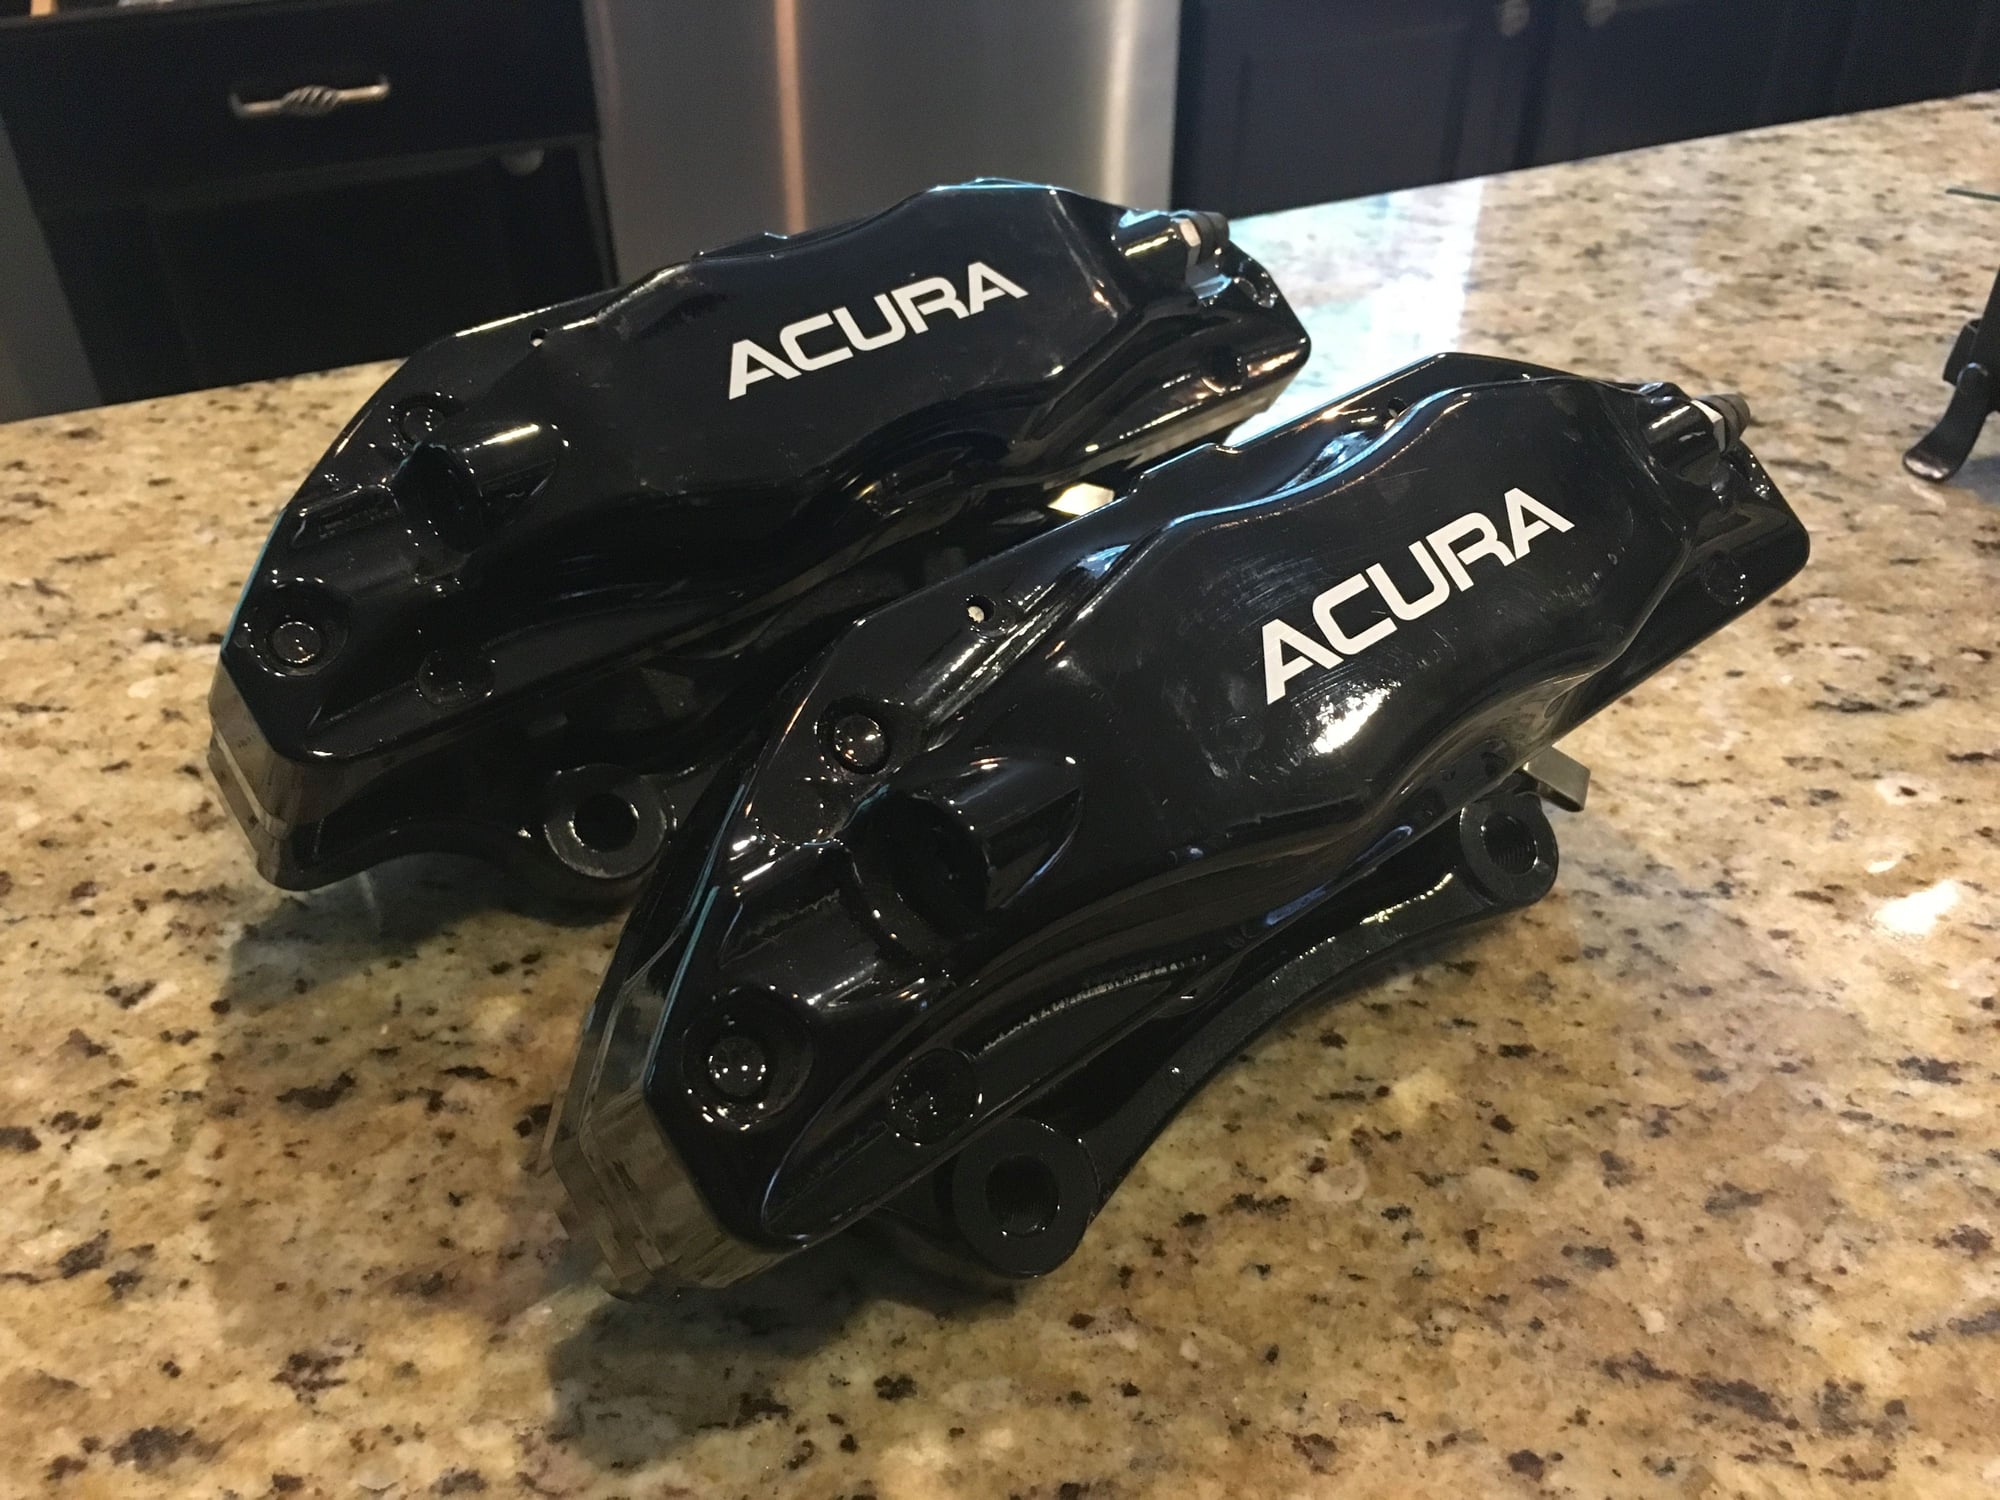 Brakes - SOLD: New Brembo Acura TL-S Front Calipers and Pads - New - 2004 to 2008 Acura TL - Hillsborough, NC 27278, United States